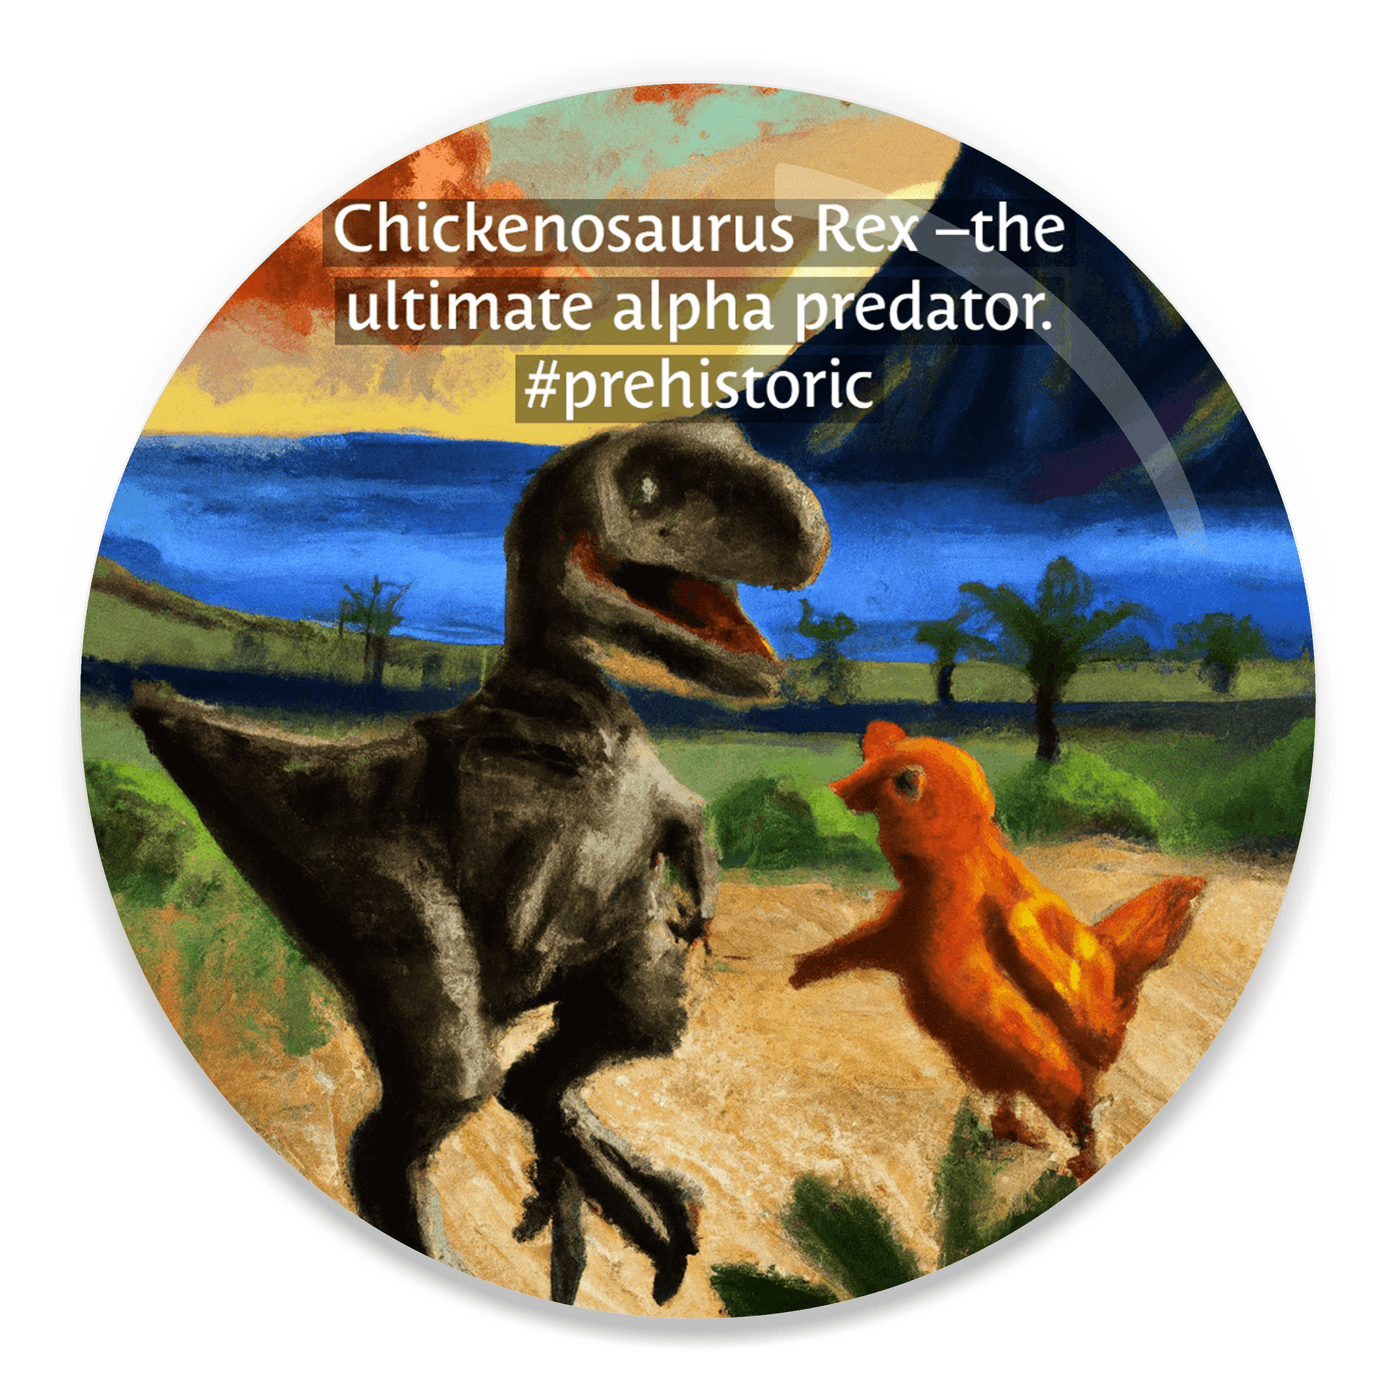 2.25 inch round colorful magnet with image of funny image of dinosaur and chicken